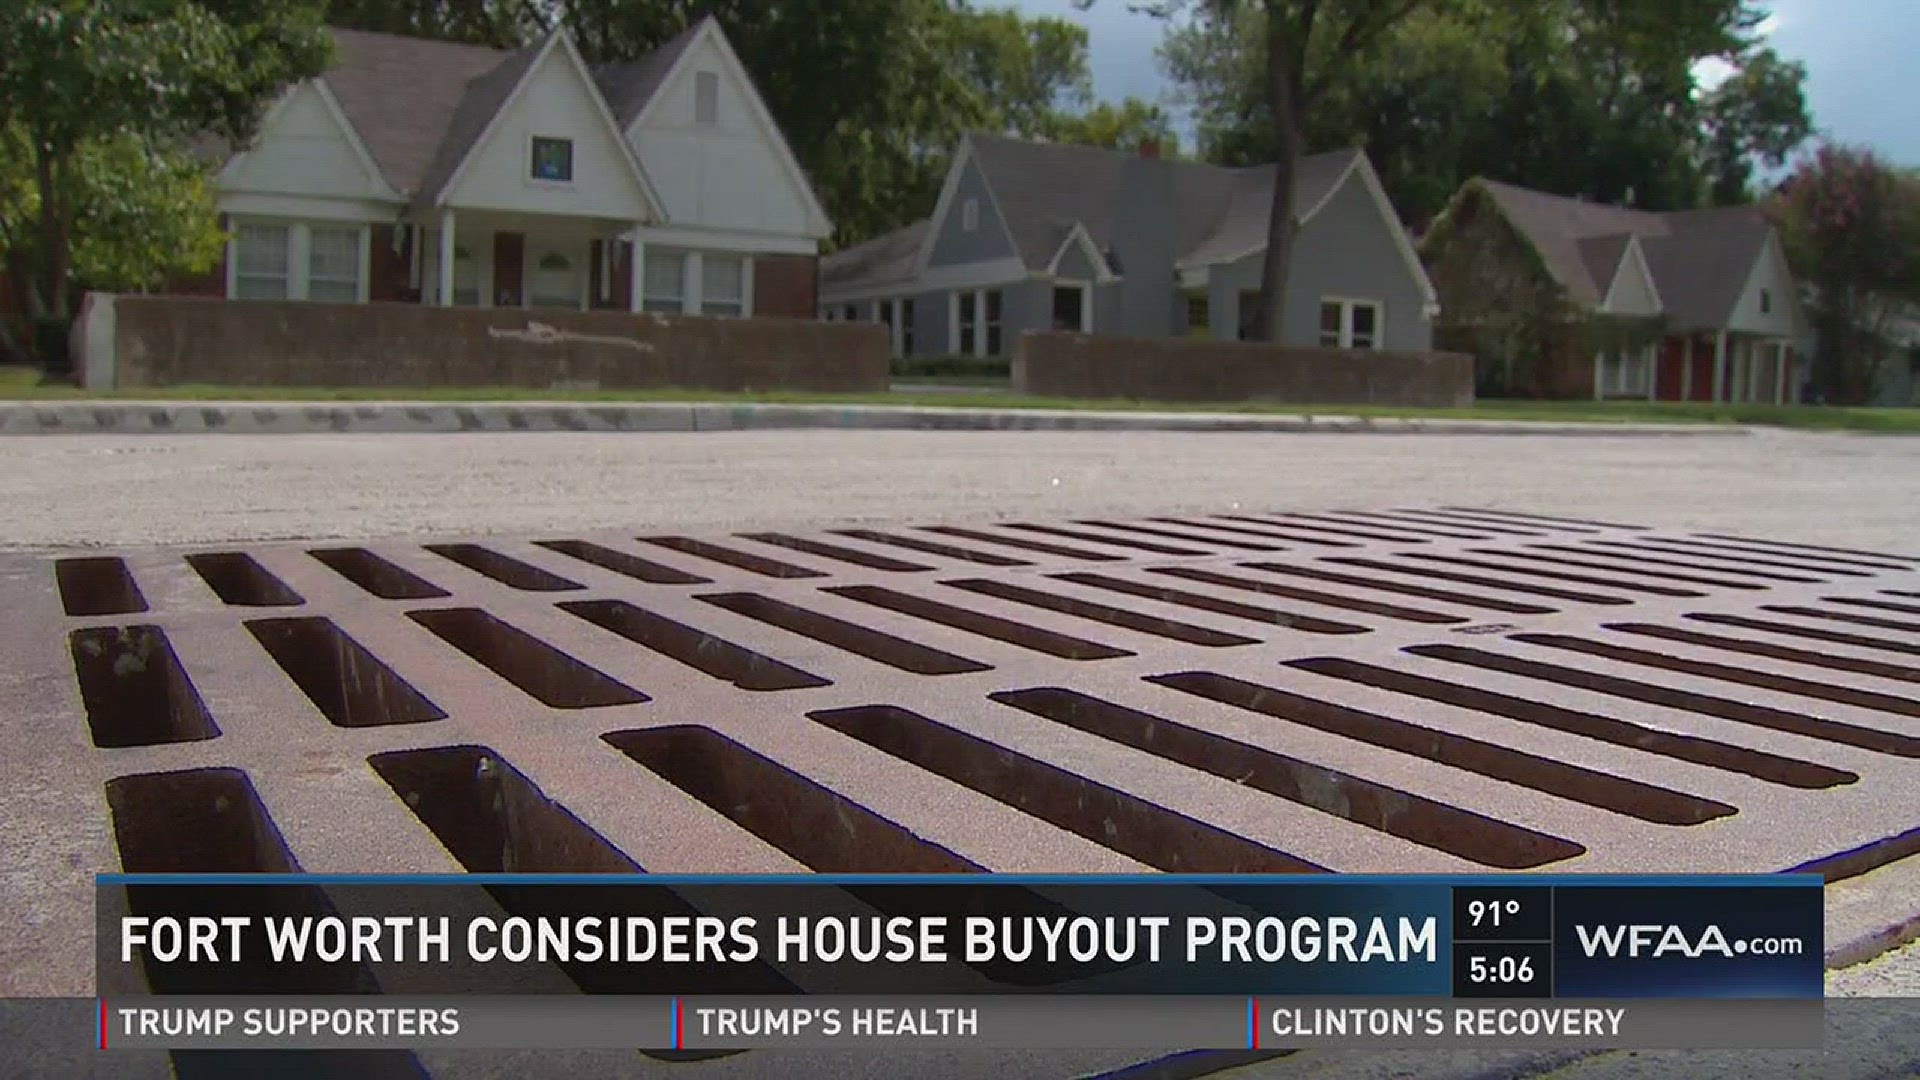 Homes being bought by the city could become a reality in this Fort Worth neighborhood hit hard by flooding in June. Lauren Zakalik reports.